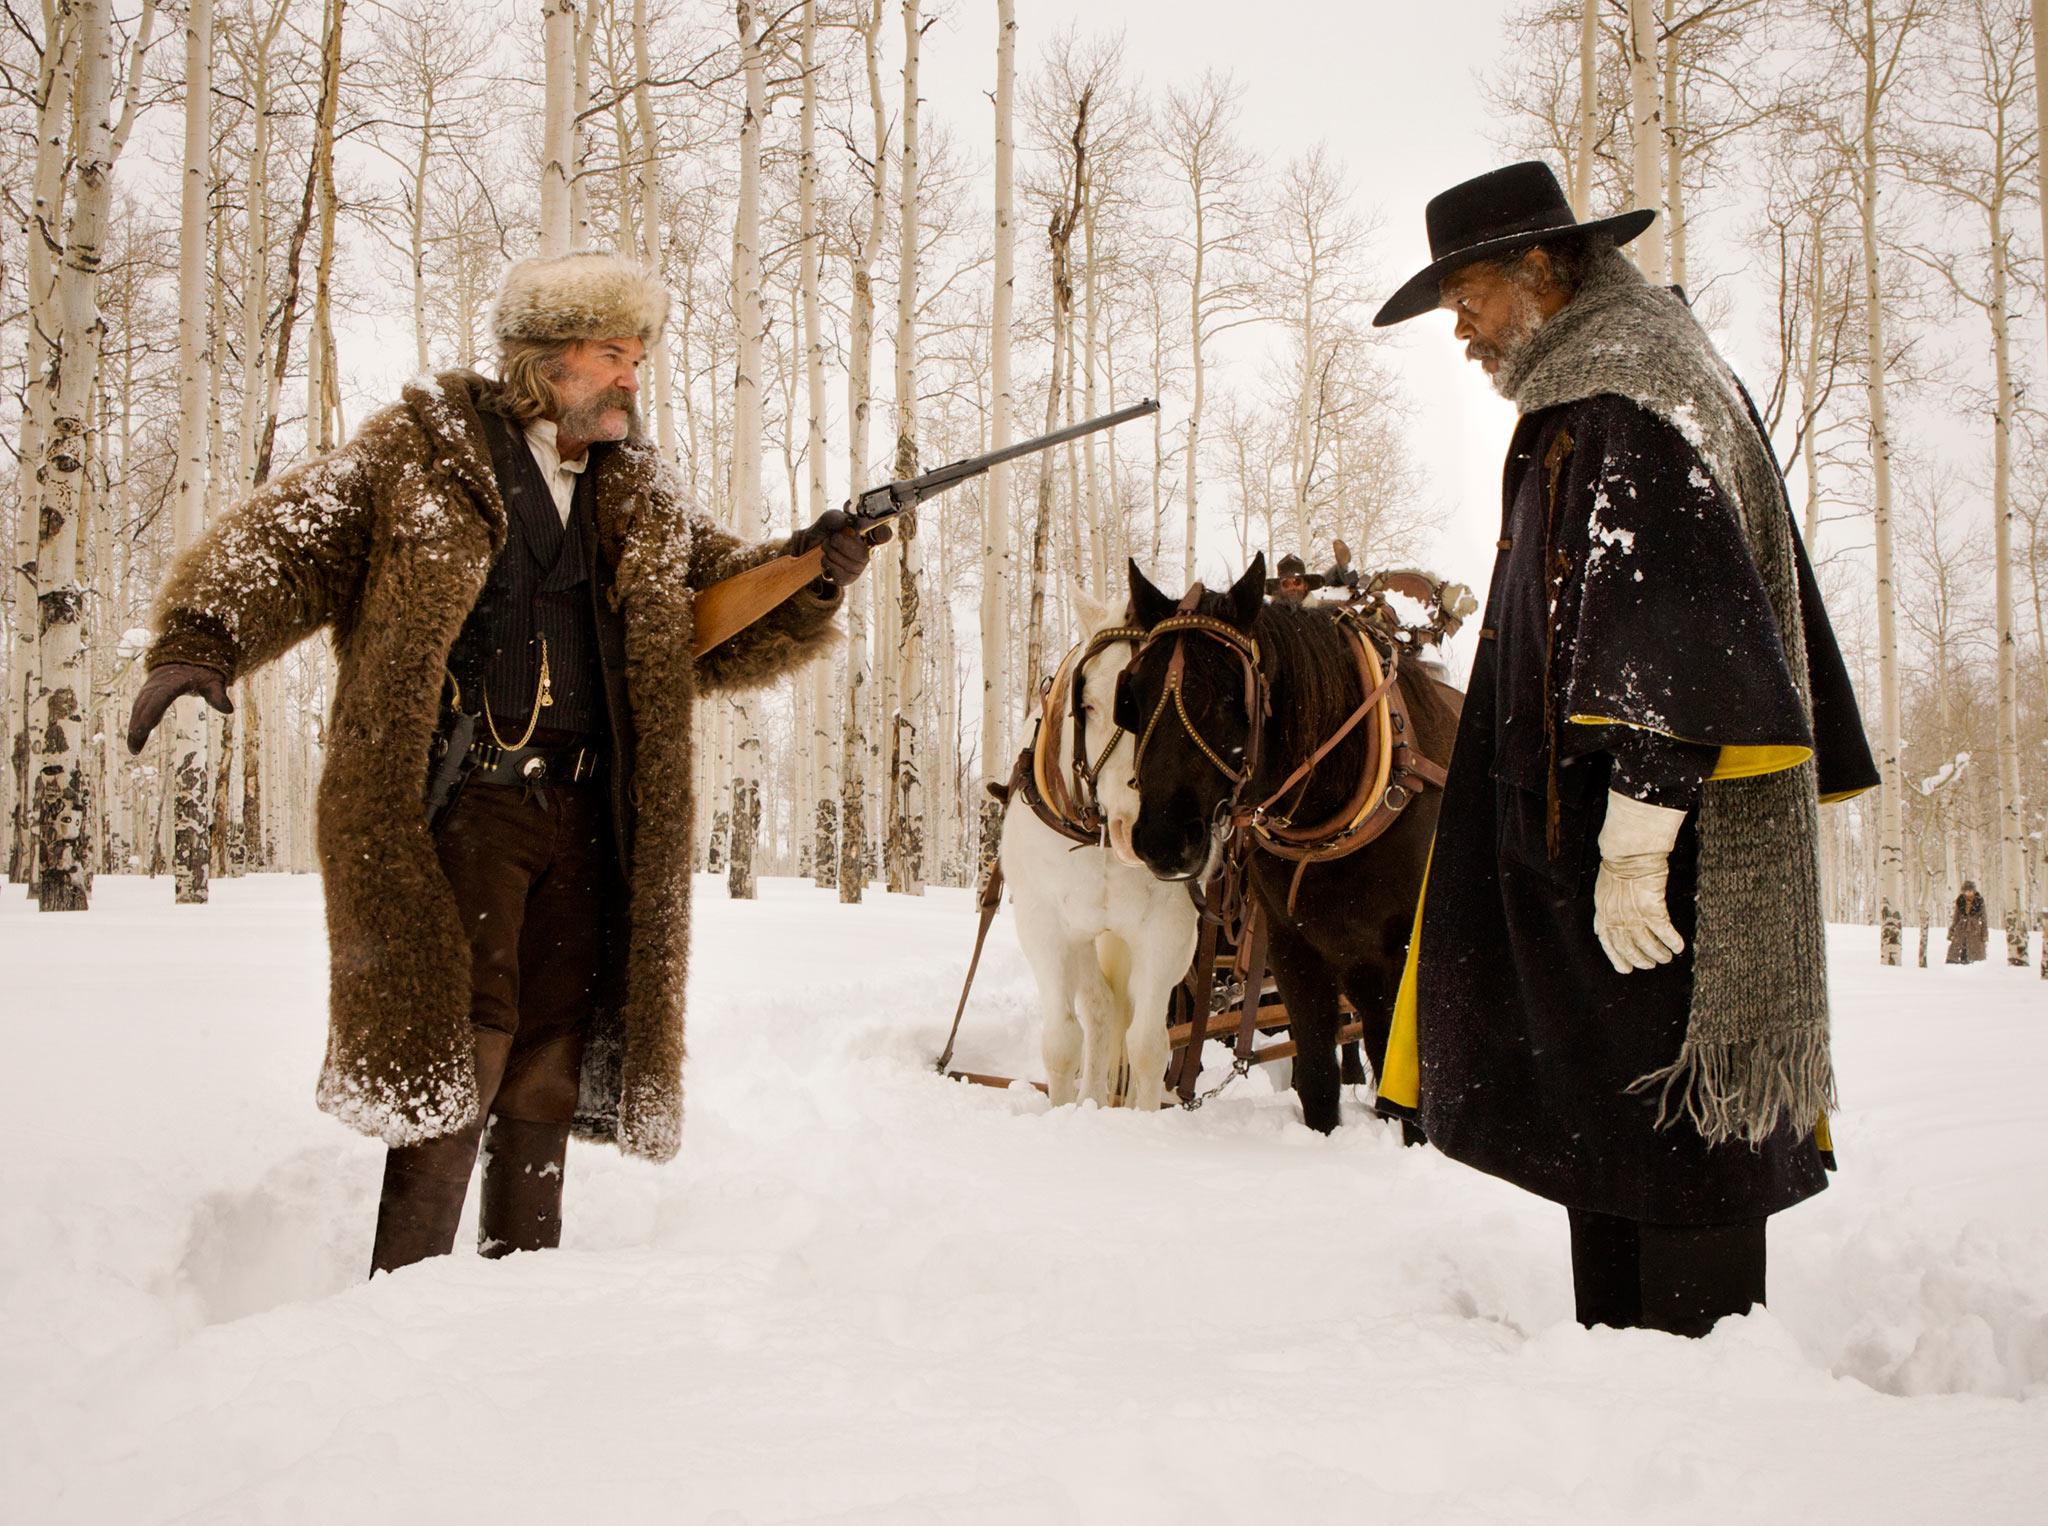 Kurt Russell (left) and Samuel L Jackson in ‘The Hateful Eight’